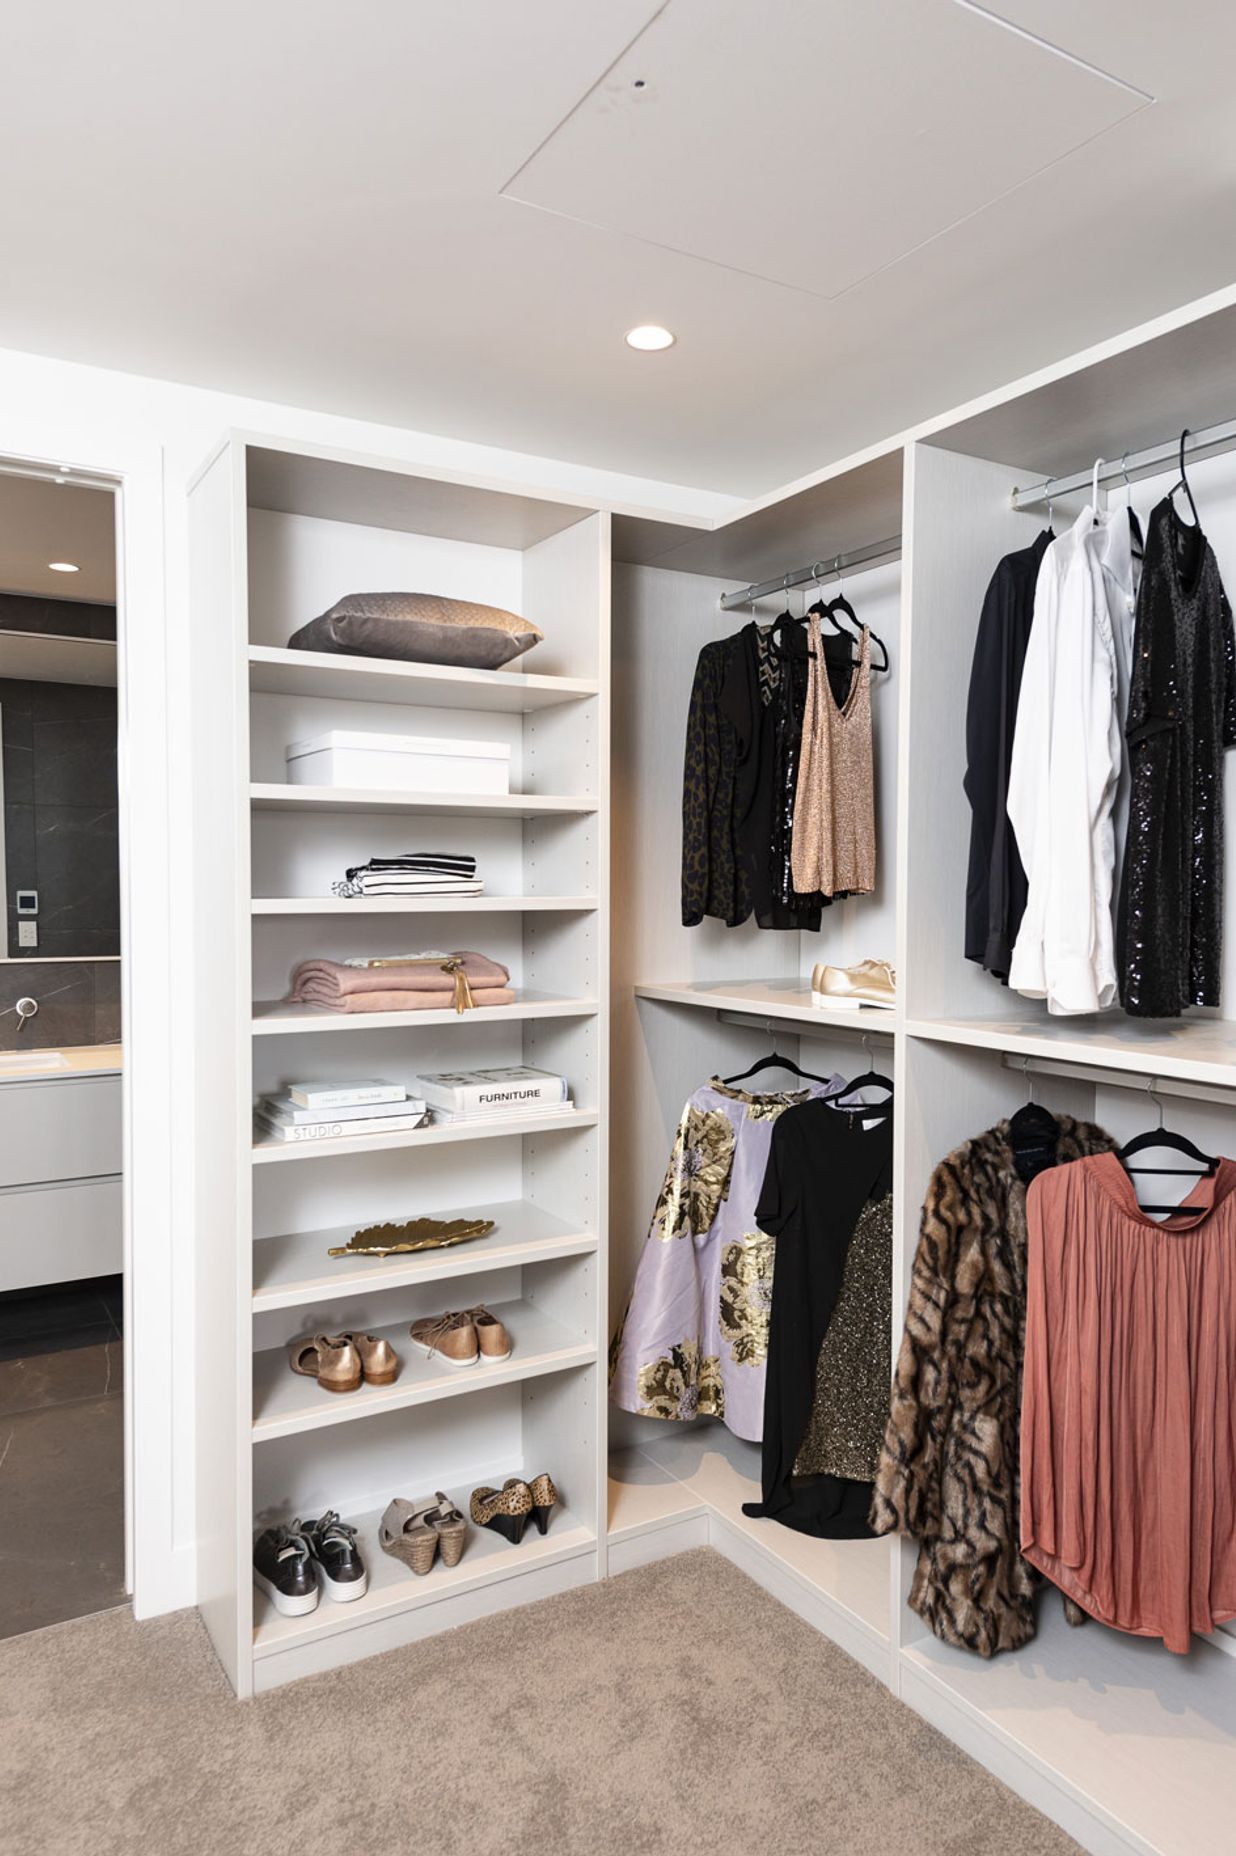 Need a space with more hanging room and less drawers? A custom wardrobe solution can accommodate all your requirements.